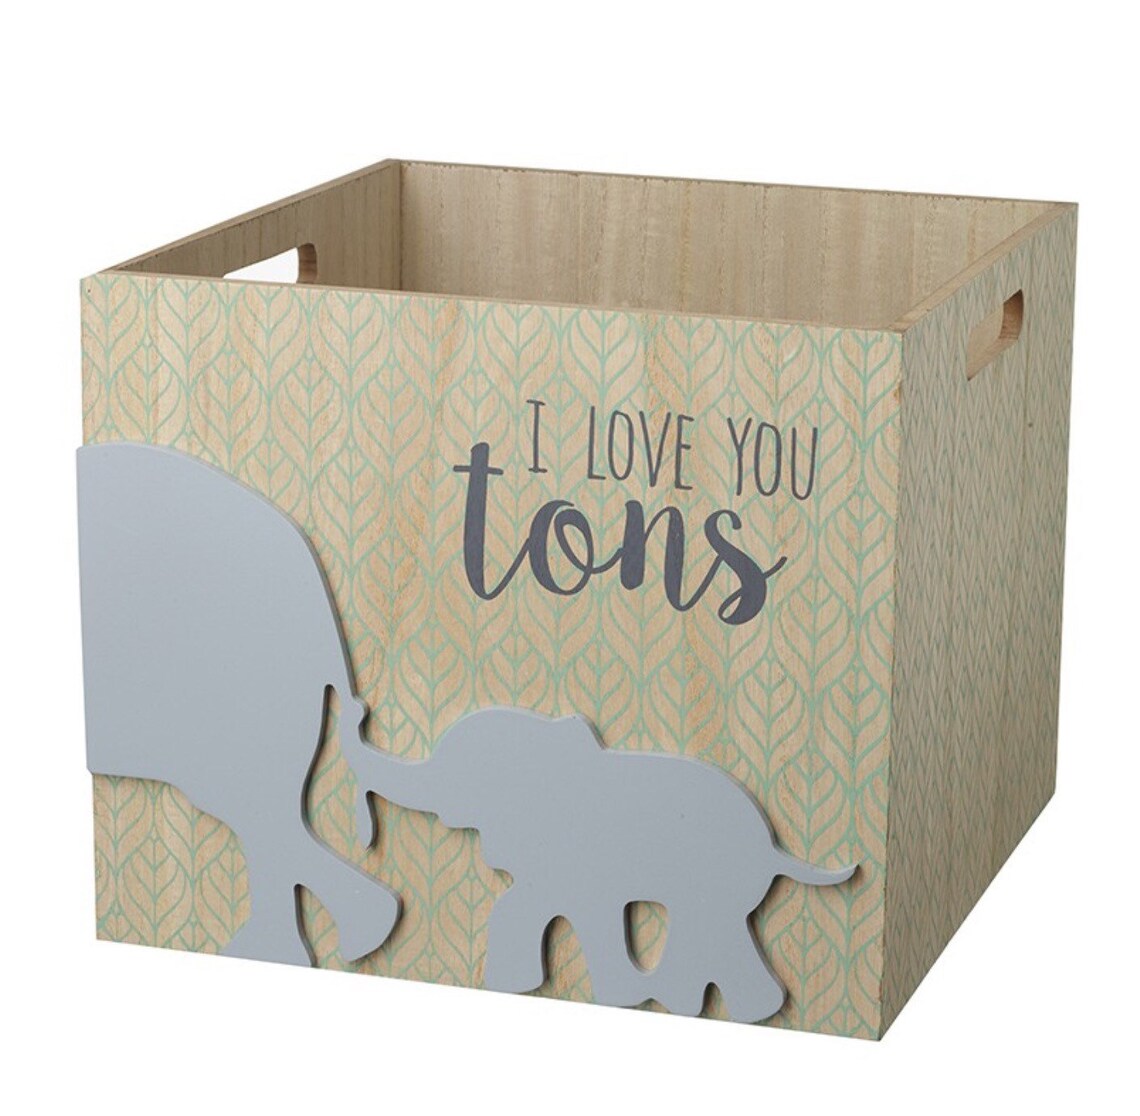 I Love You Tons Elephant Detail Wooden Children' Storage Box / Crate